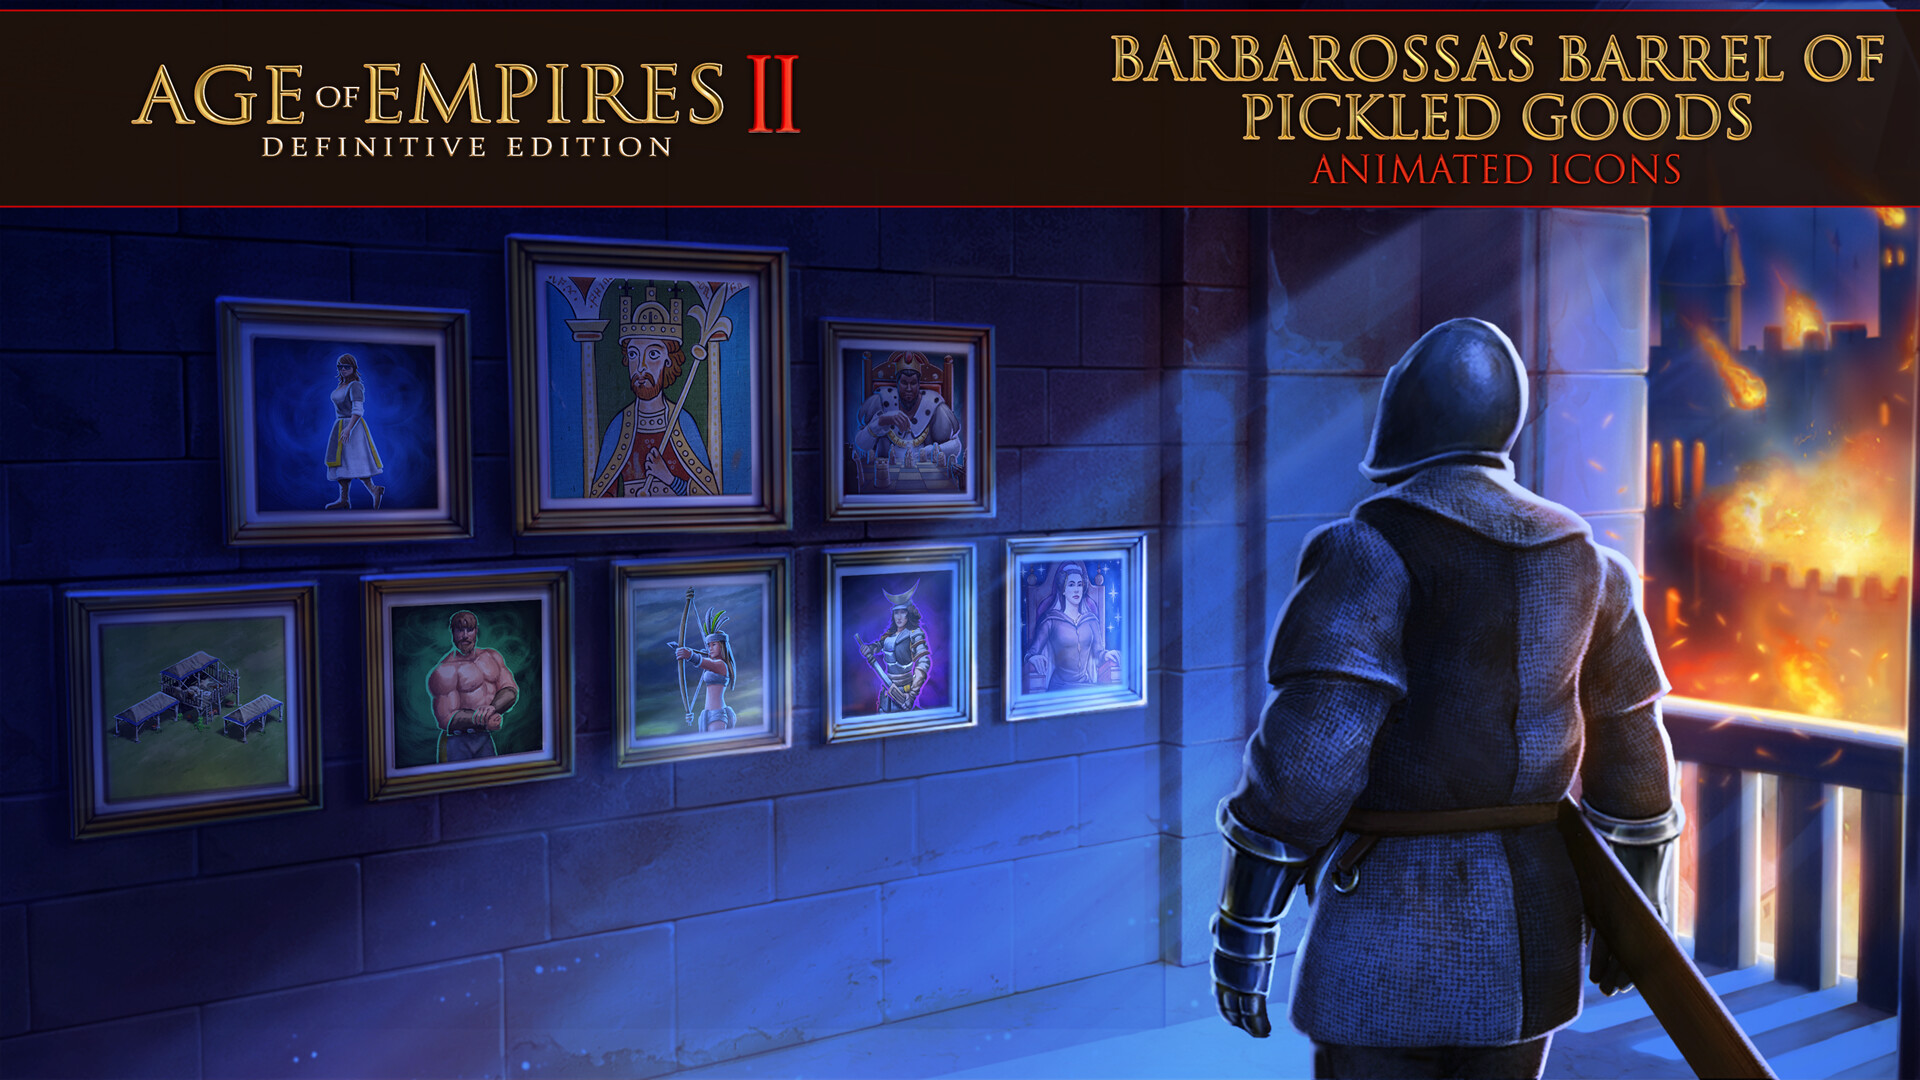 Age of Empires II: Definitive Edition – Barbarossa’s Barrel of Pickled Goods Animated Icons Featured Screenshot #1